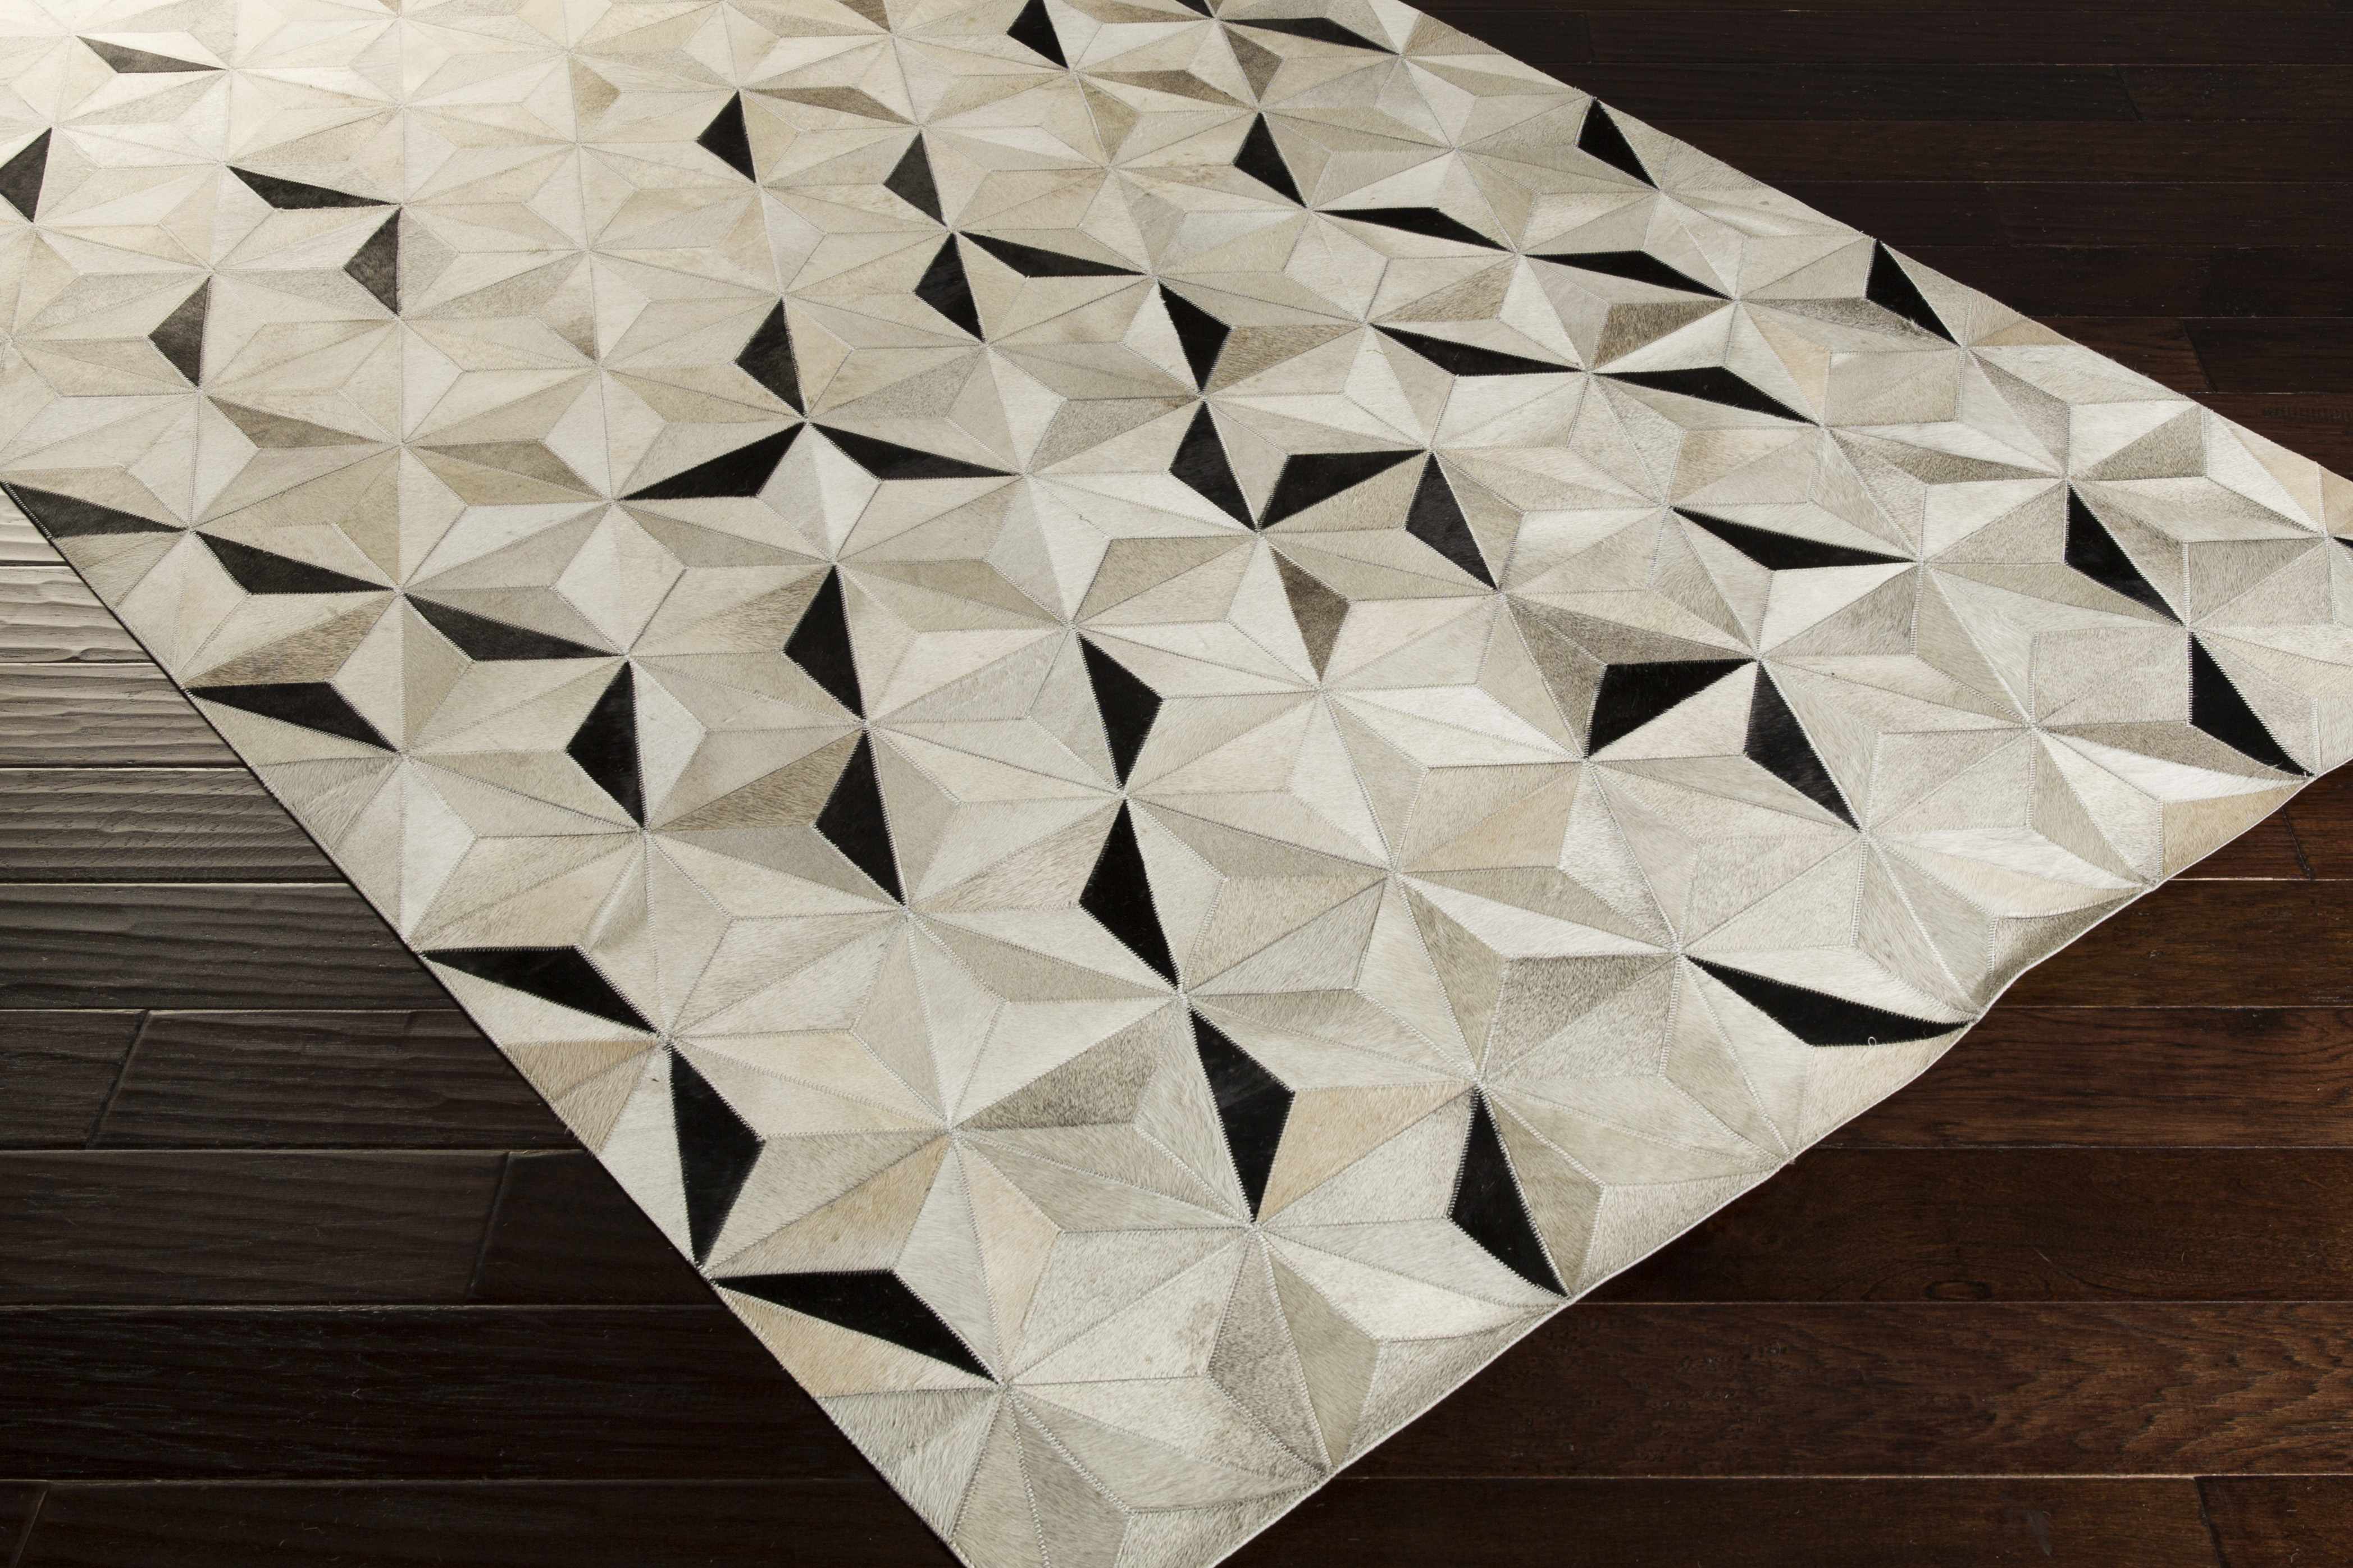 Veyo 9' x 12' Hides and Leather Cowhide Leather Area Rug - Hauteloom